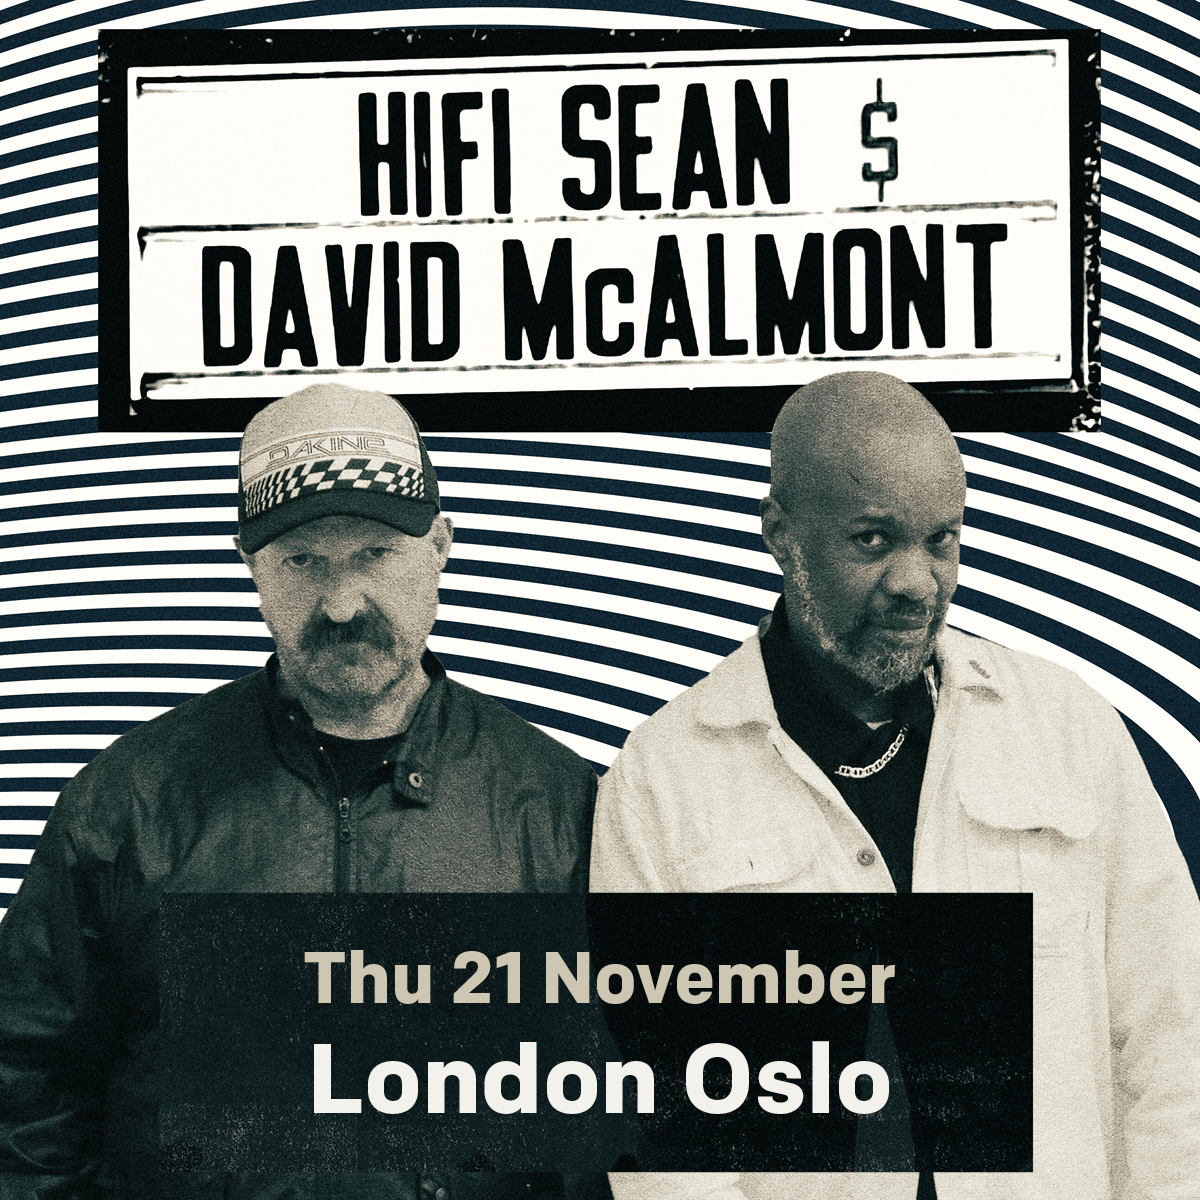 London! @HifiSean and David McAlmont are headed your way for a show at @OsloHackney in November 🙌 Tickets on sale this Friday at 10am via tix.to/HFSDMA